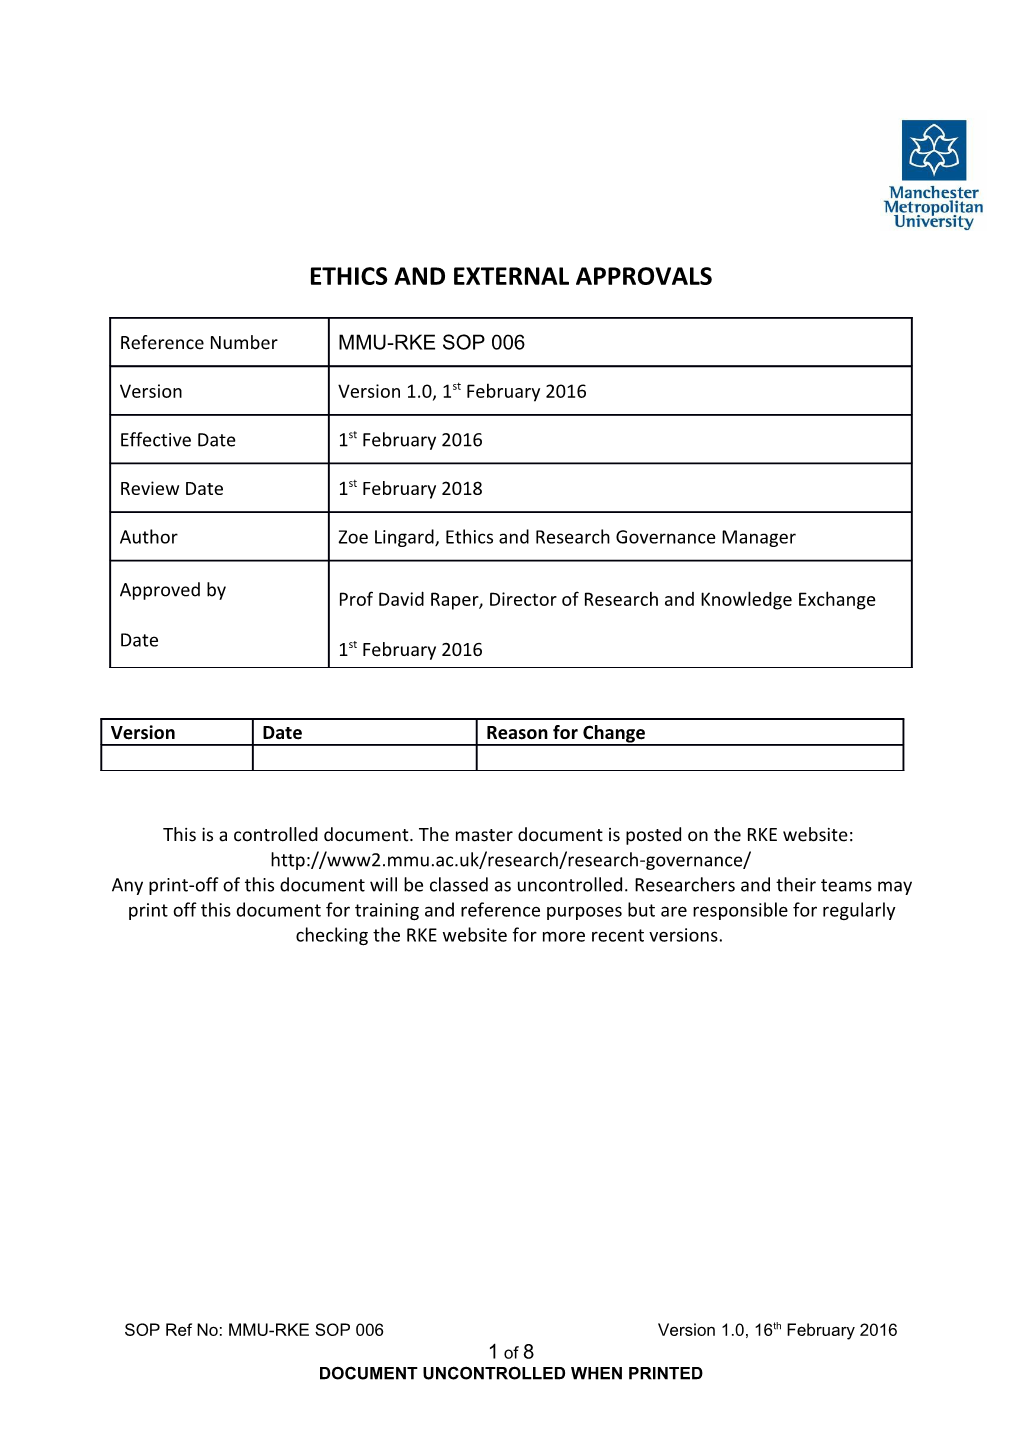 Ethics and External Approvals